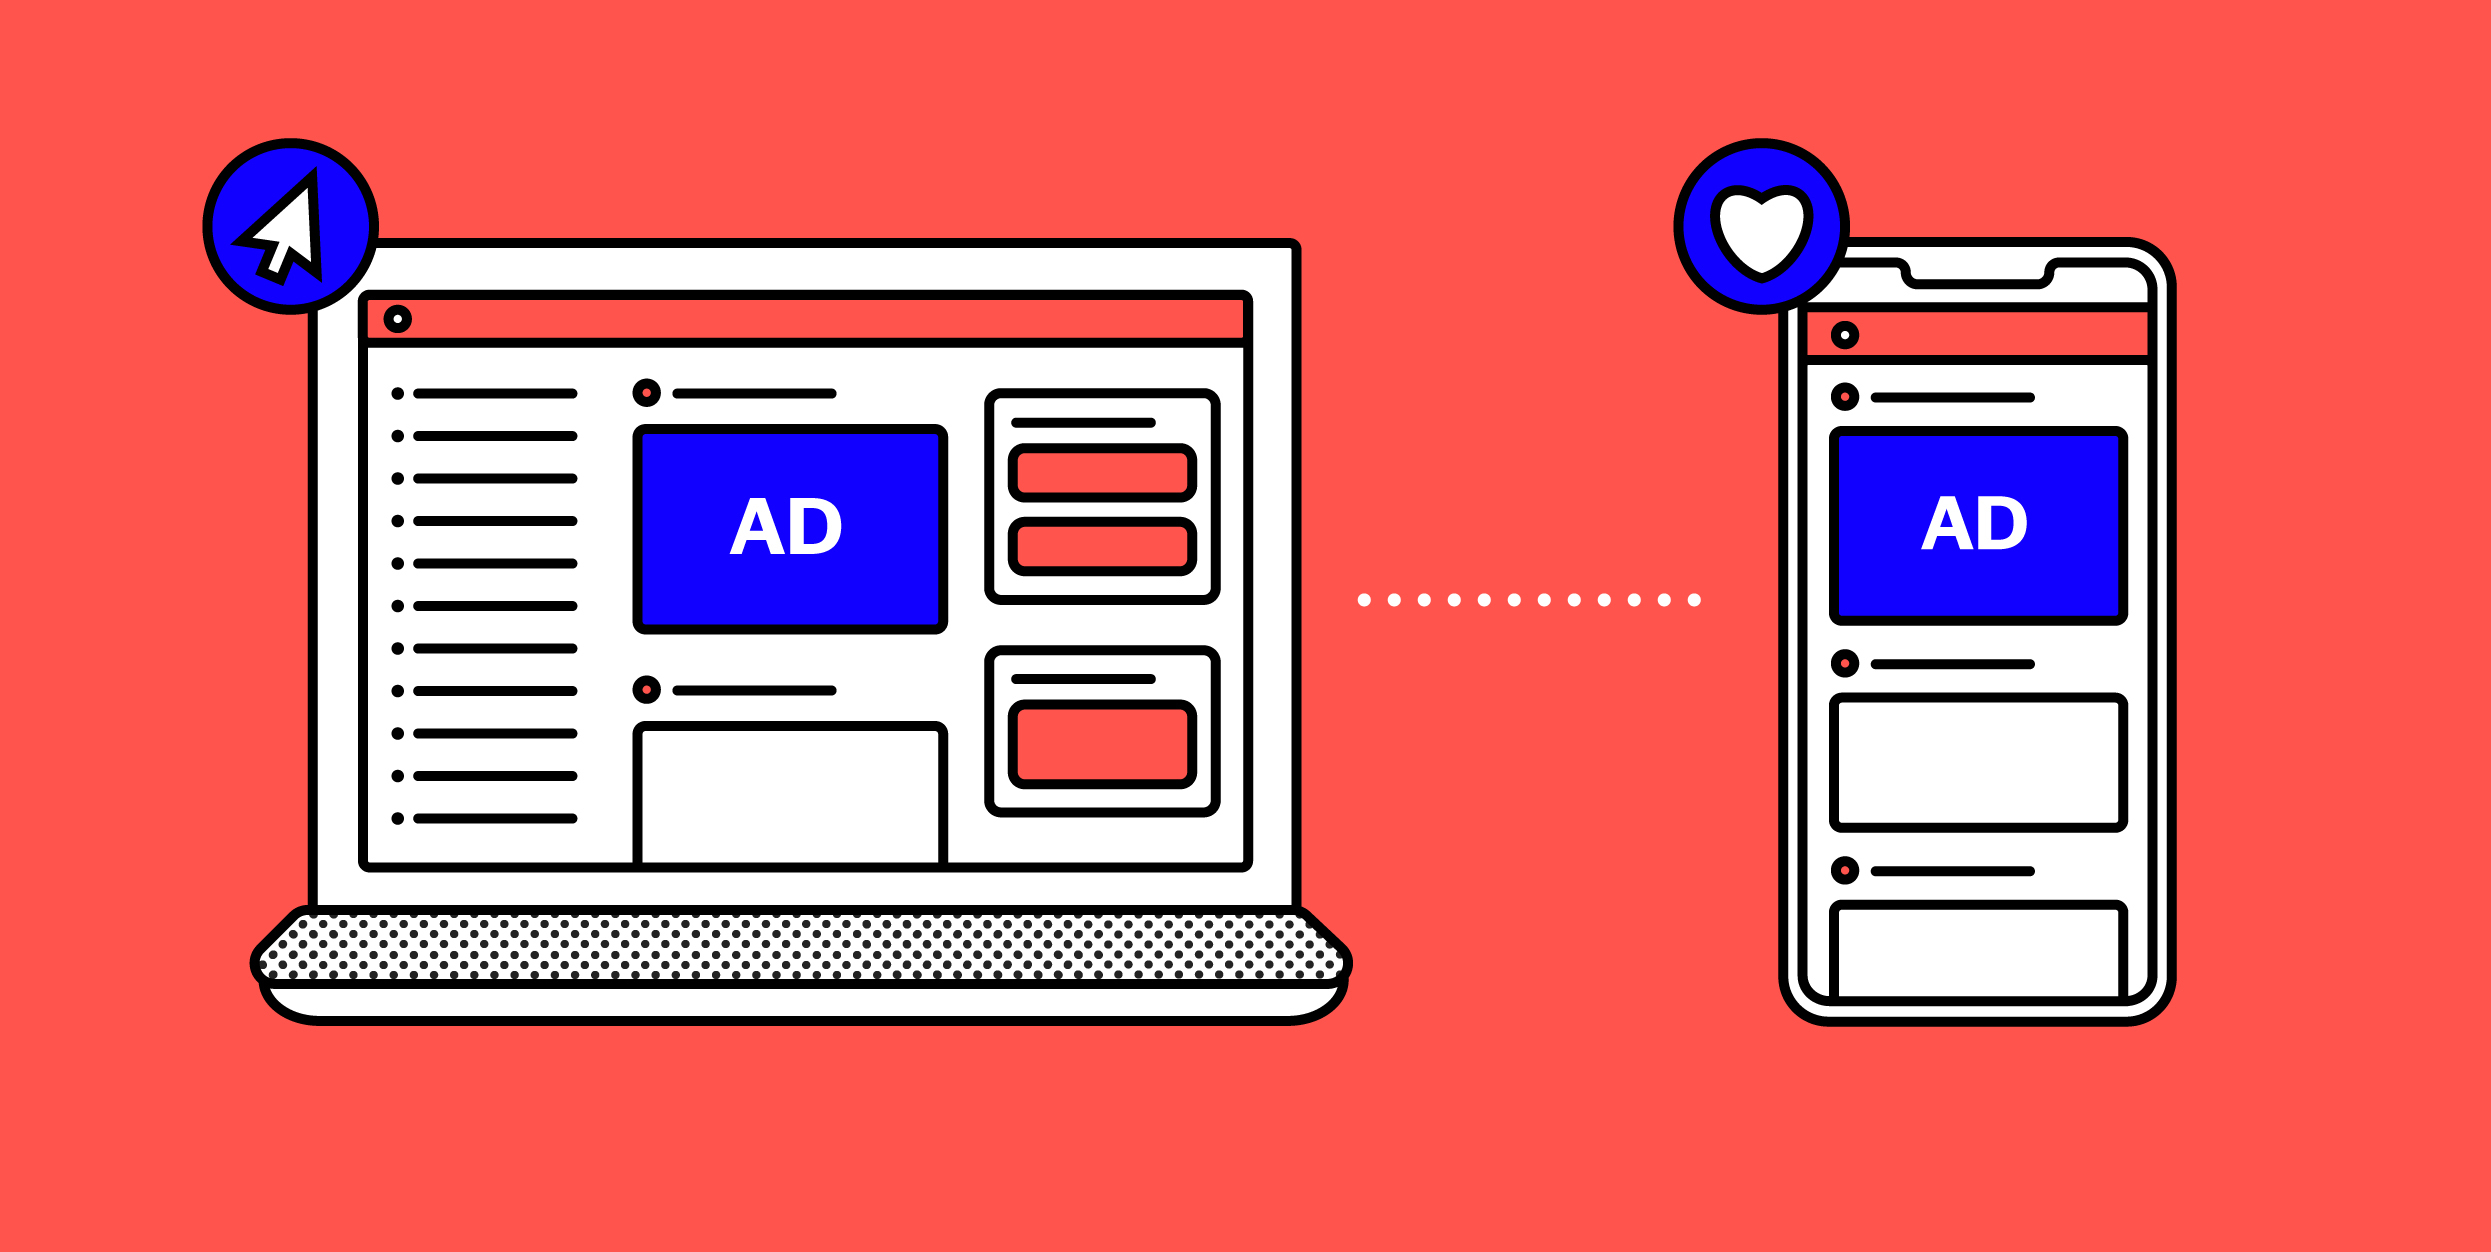 ad feature mockup graphic for desktop and mobile